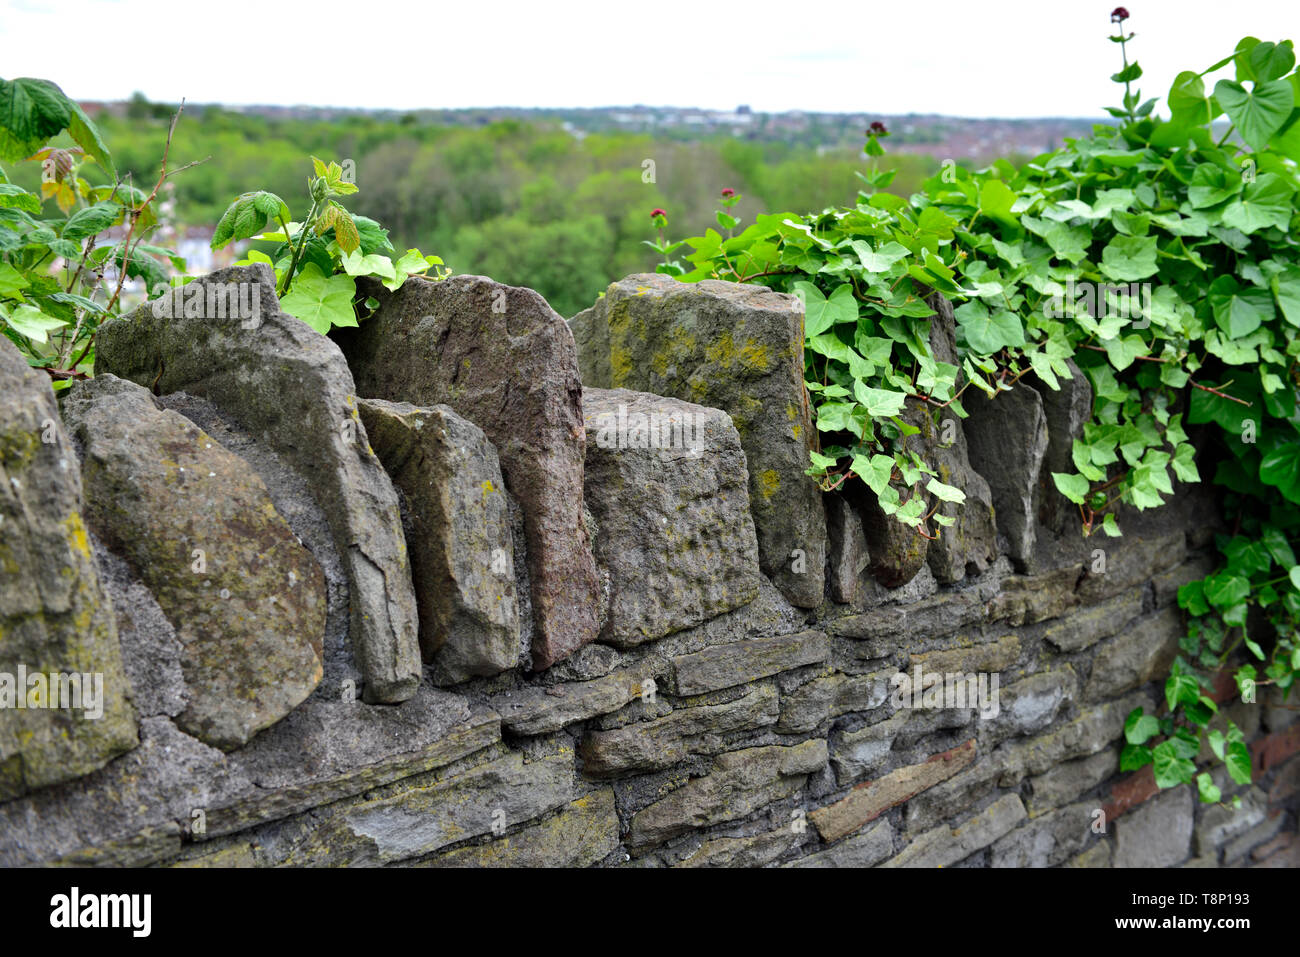 British Stone wall with traditional toppers capping stones with ivy growing over part Stock Photo